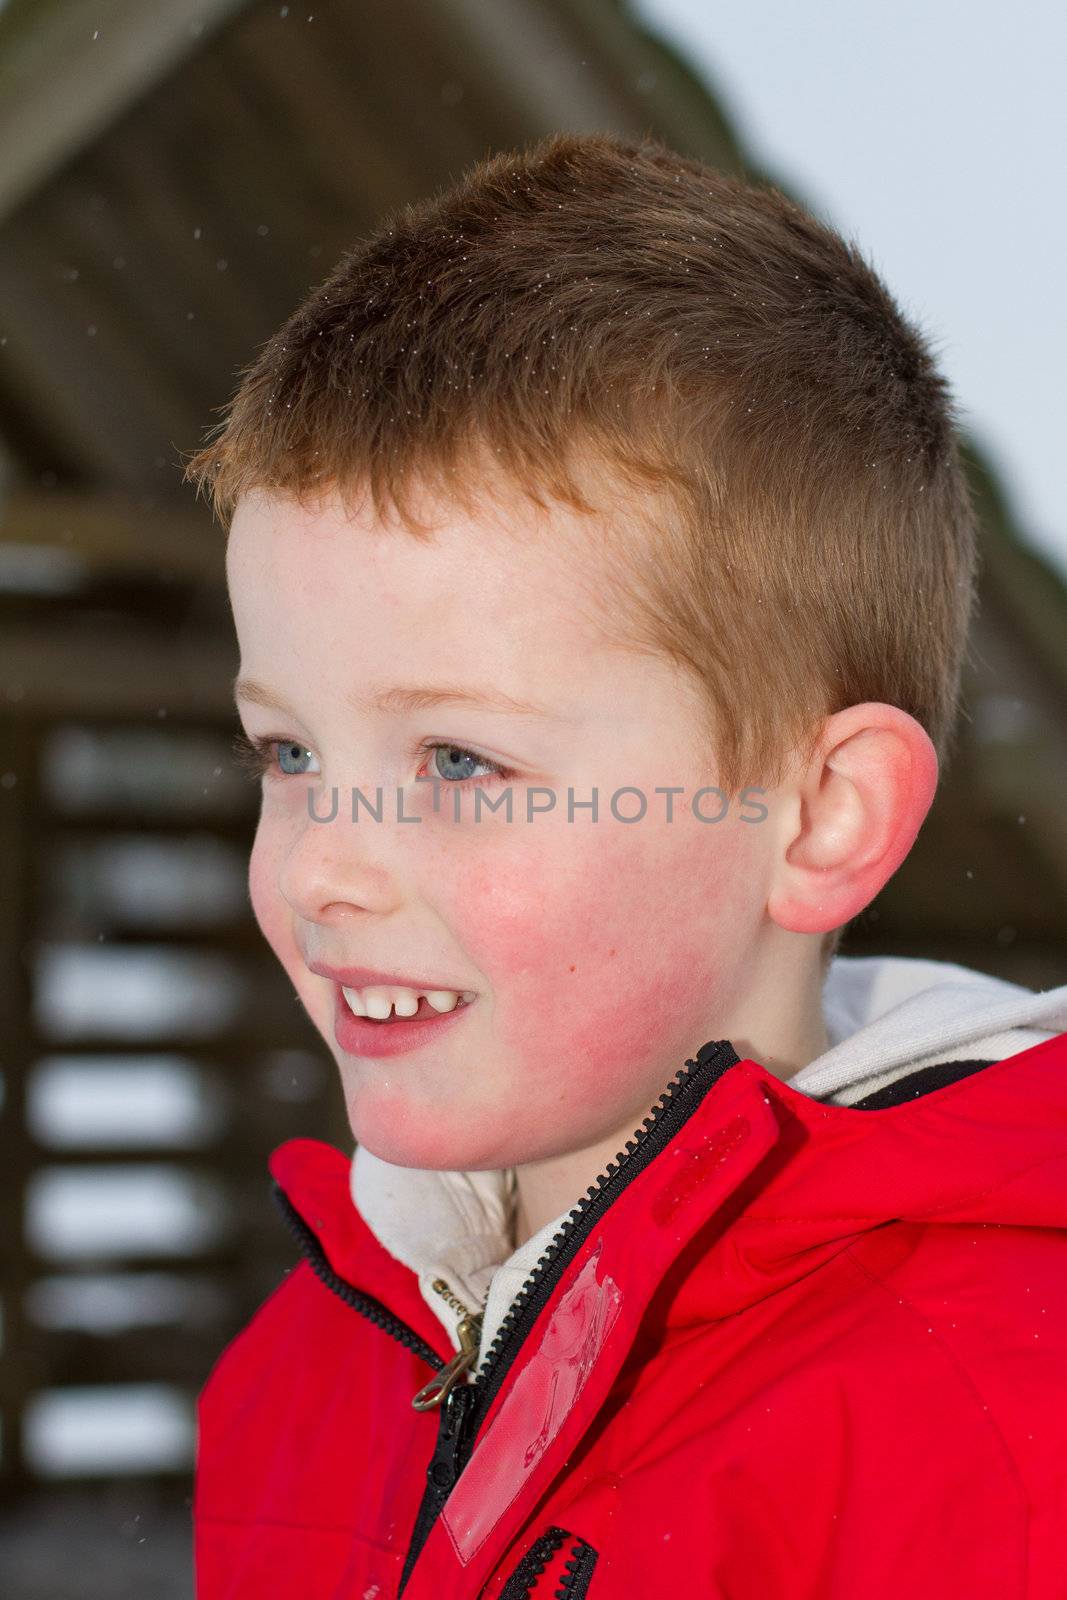 young boy smiling in the snow by smikeymikey1